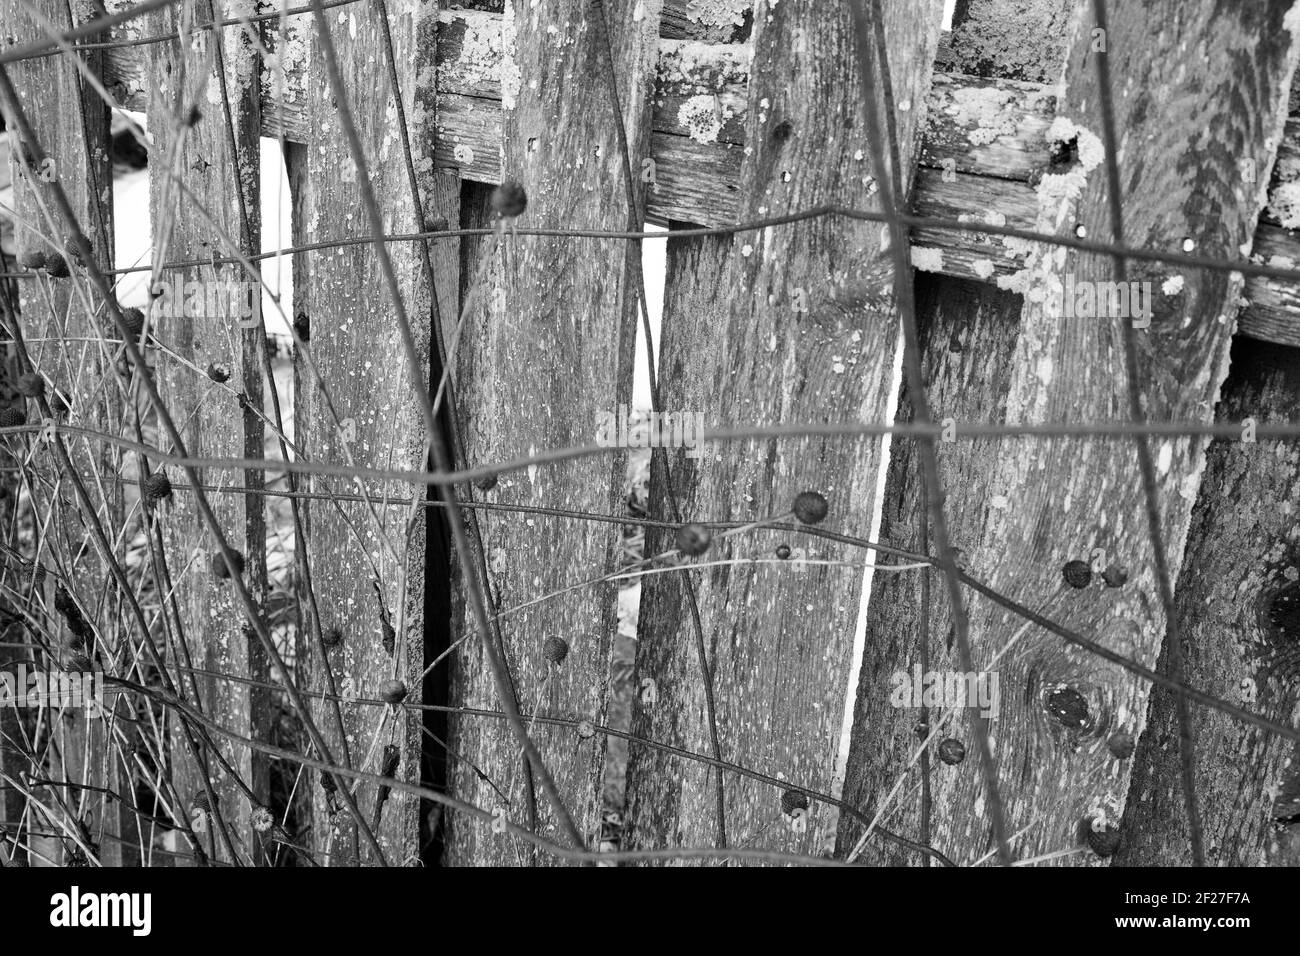 Black and white photo of wooden fence in a New England community garden in the winter. Stock Photo